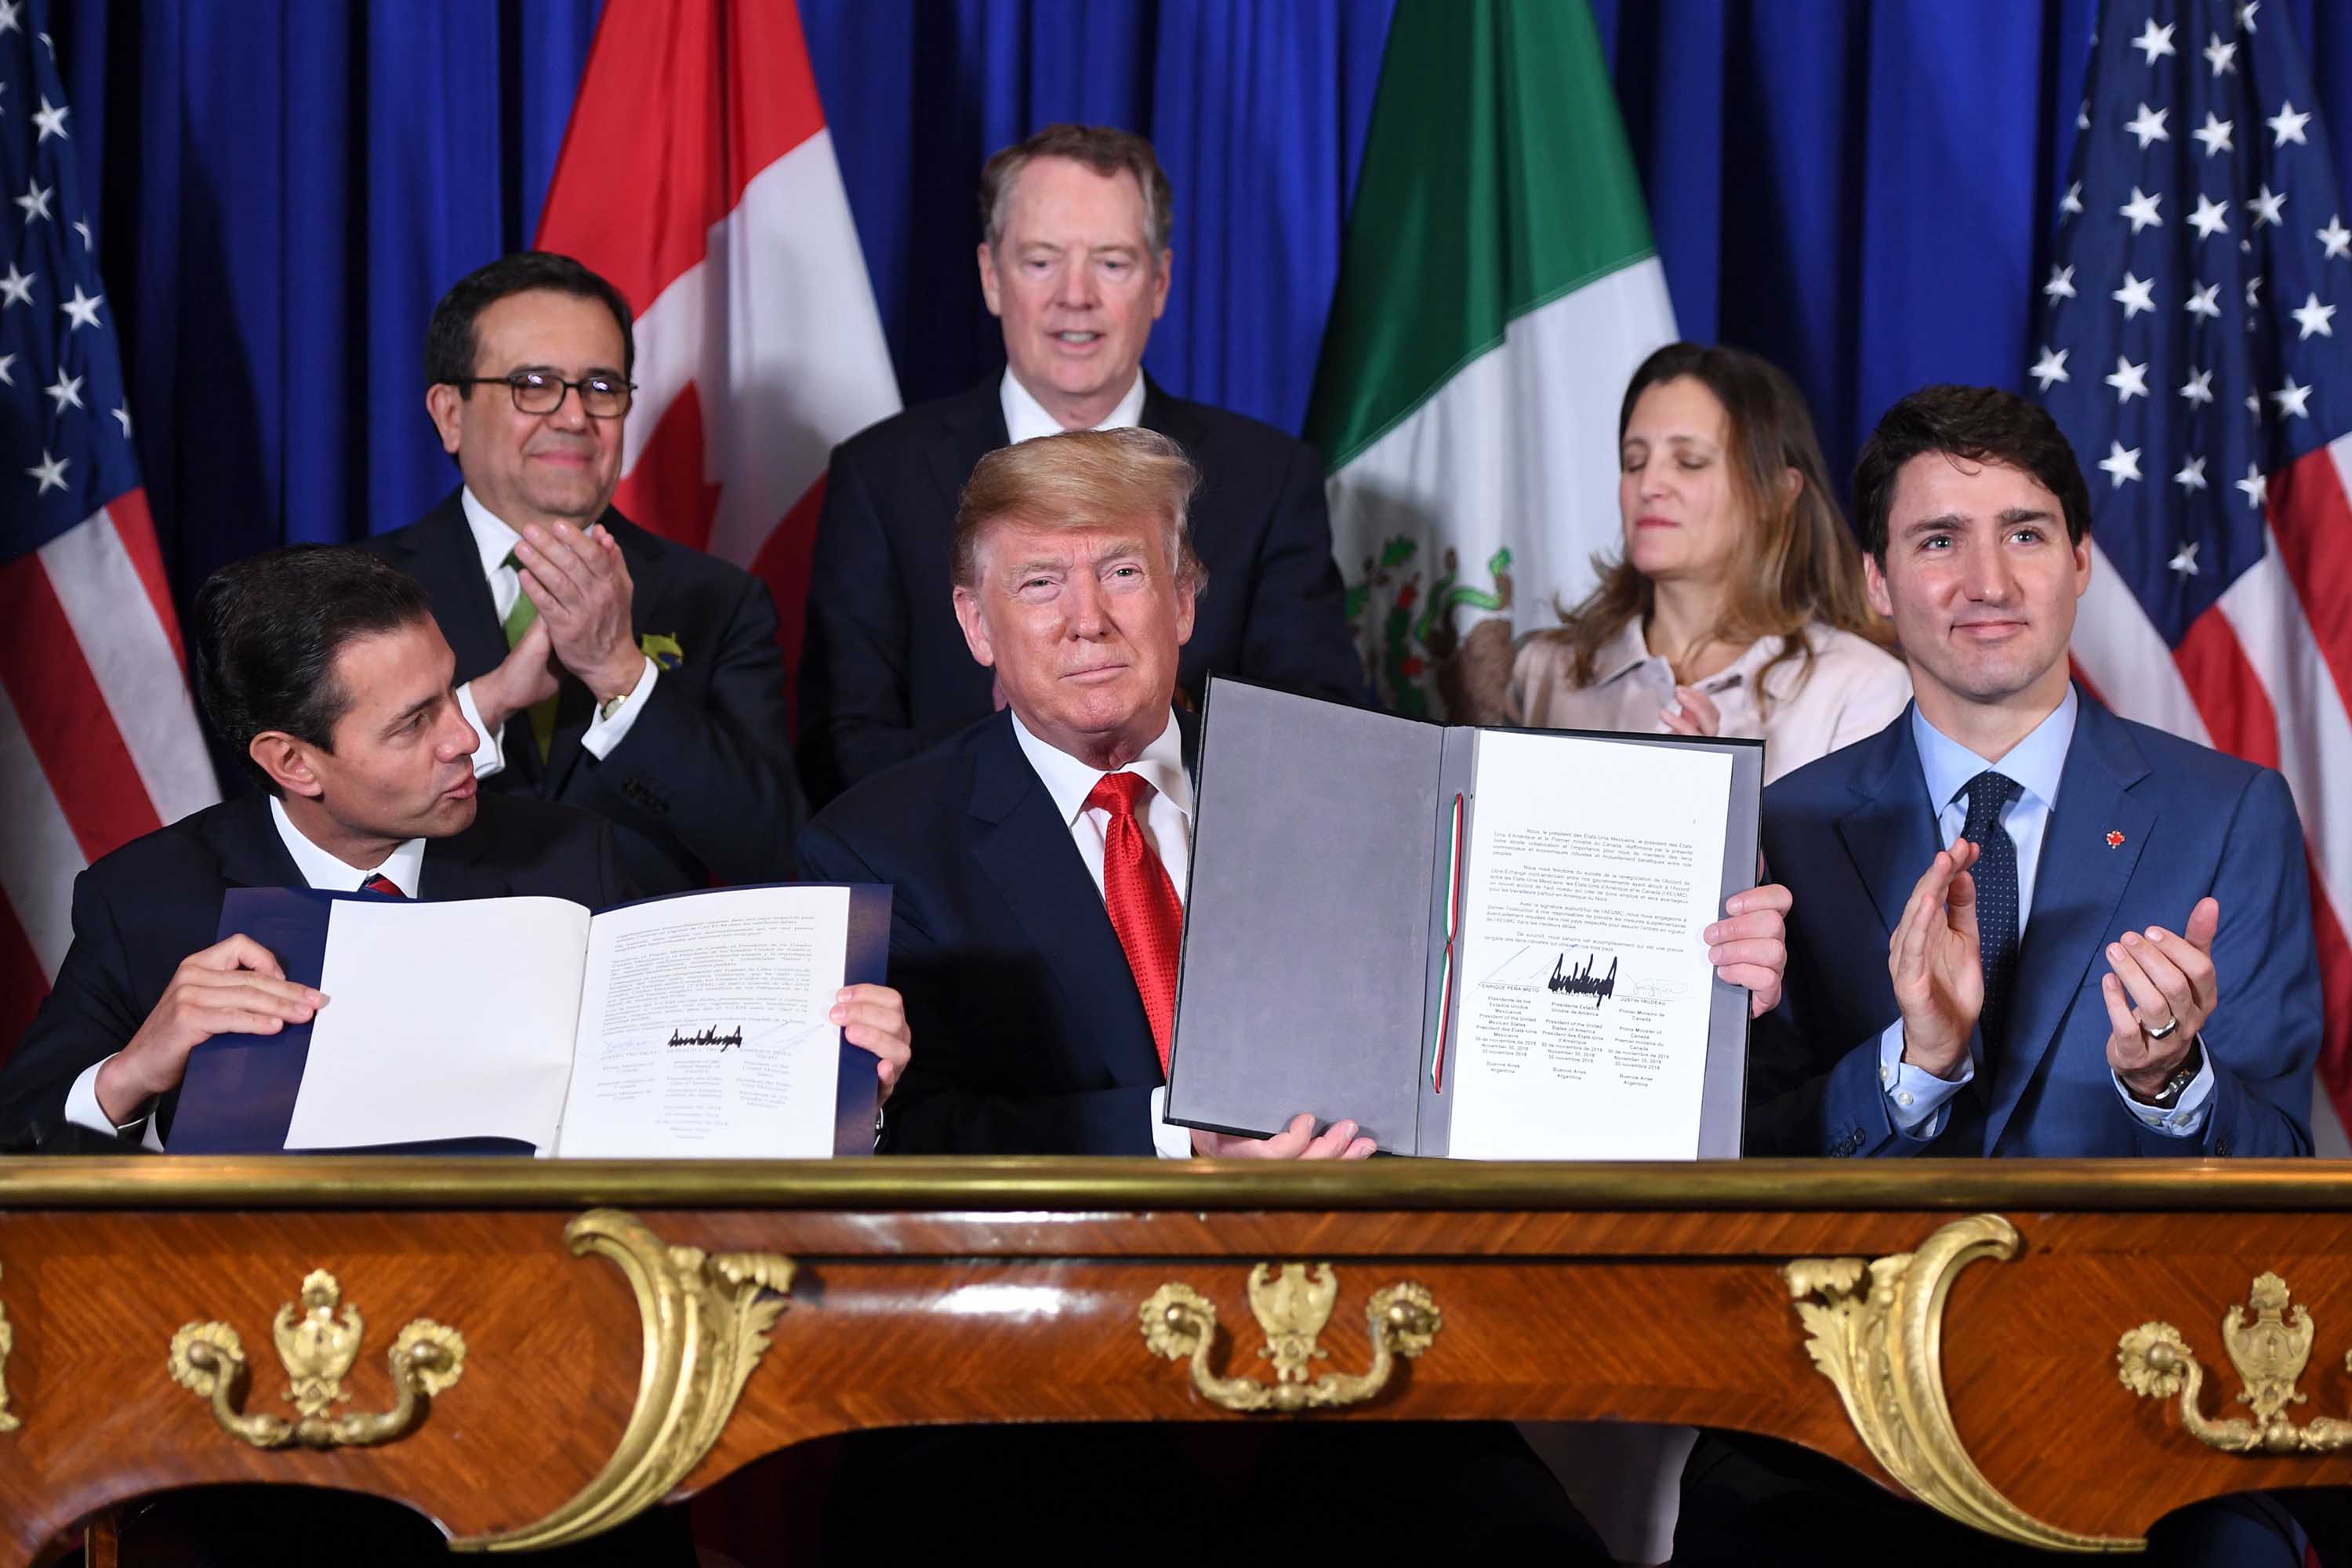 north american free trade agreement signing